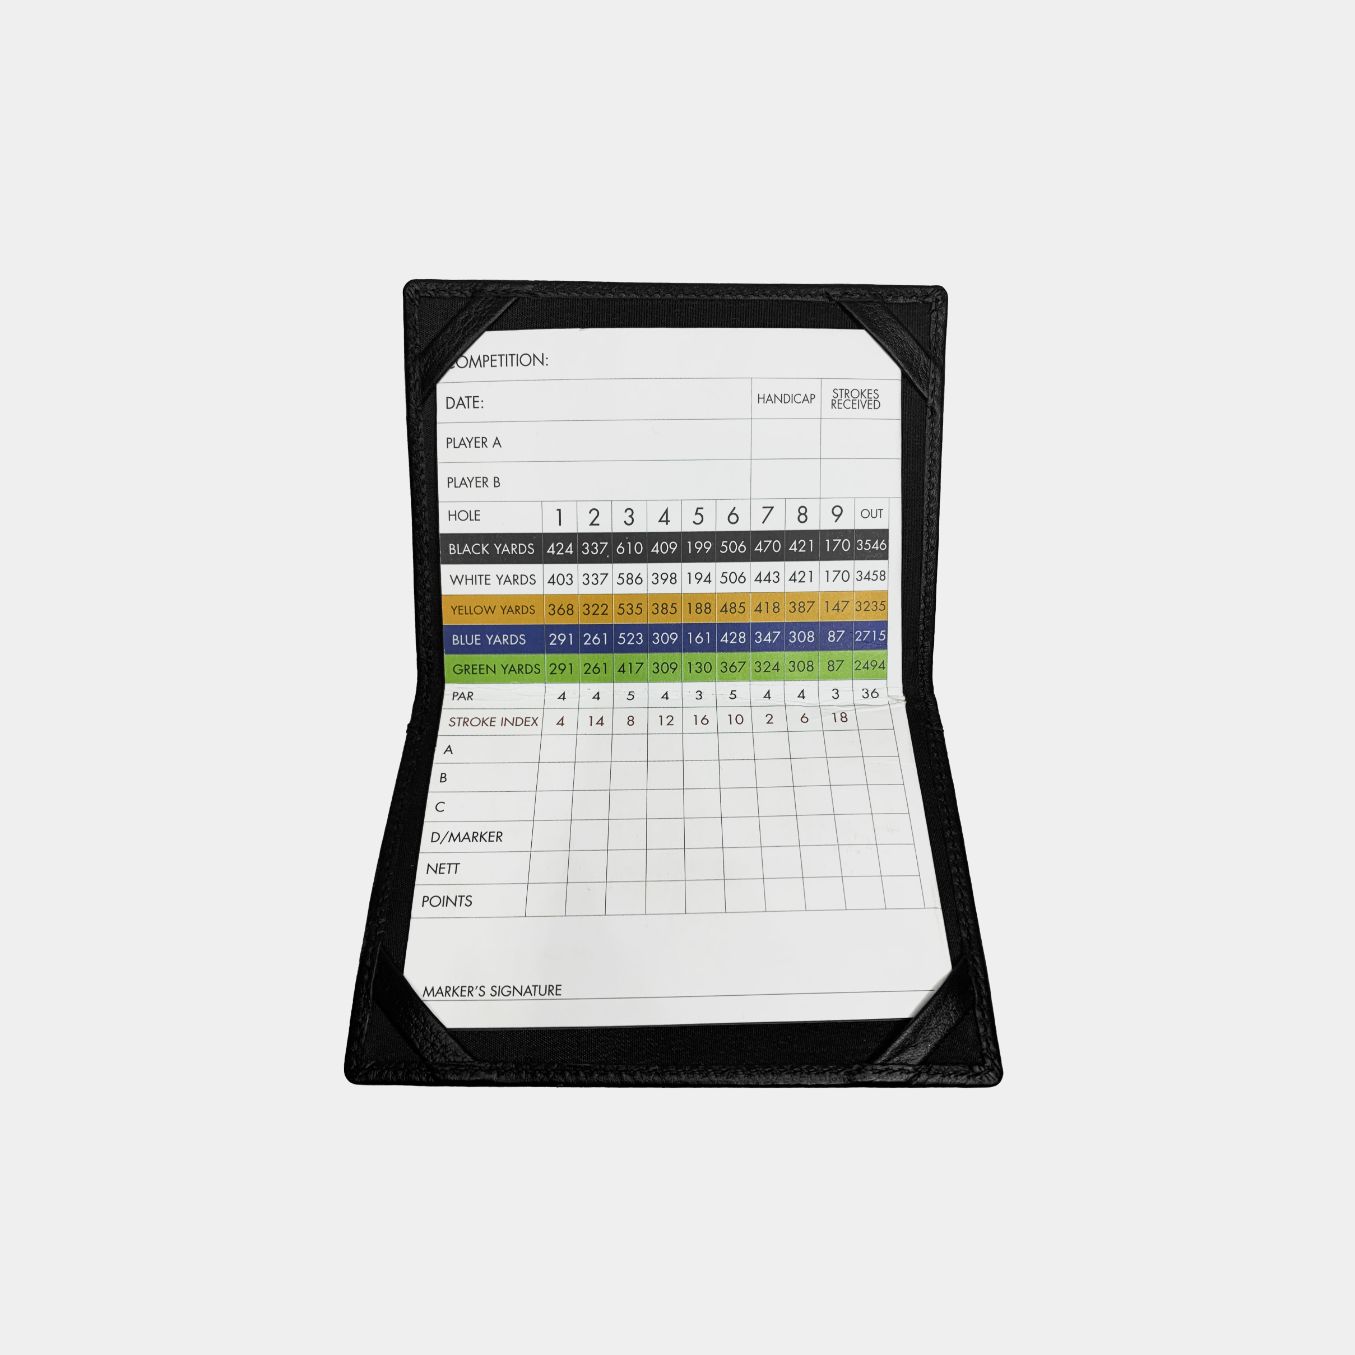 Leather pocket golf scorecard holder, personalise with your golf clubs logo.